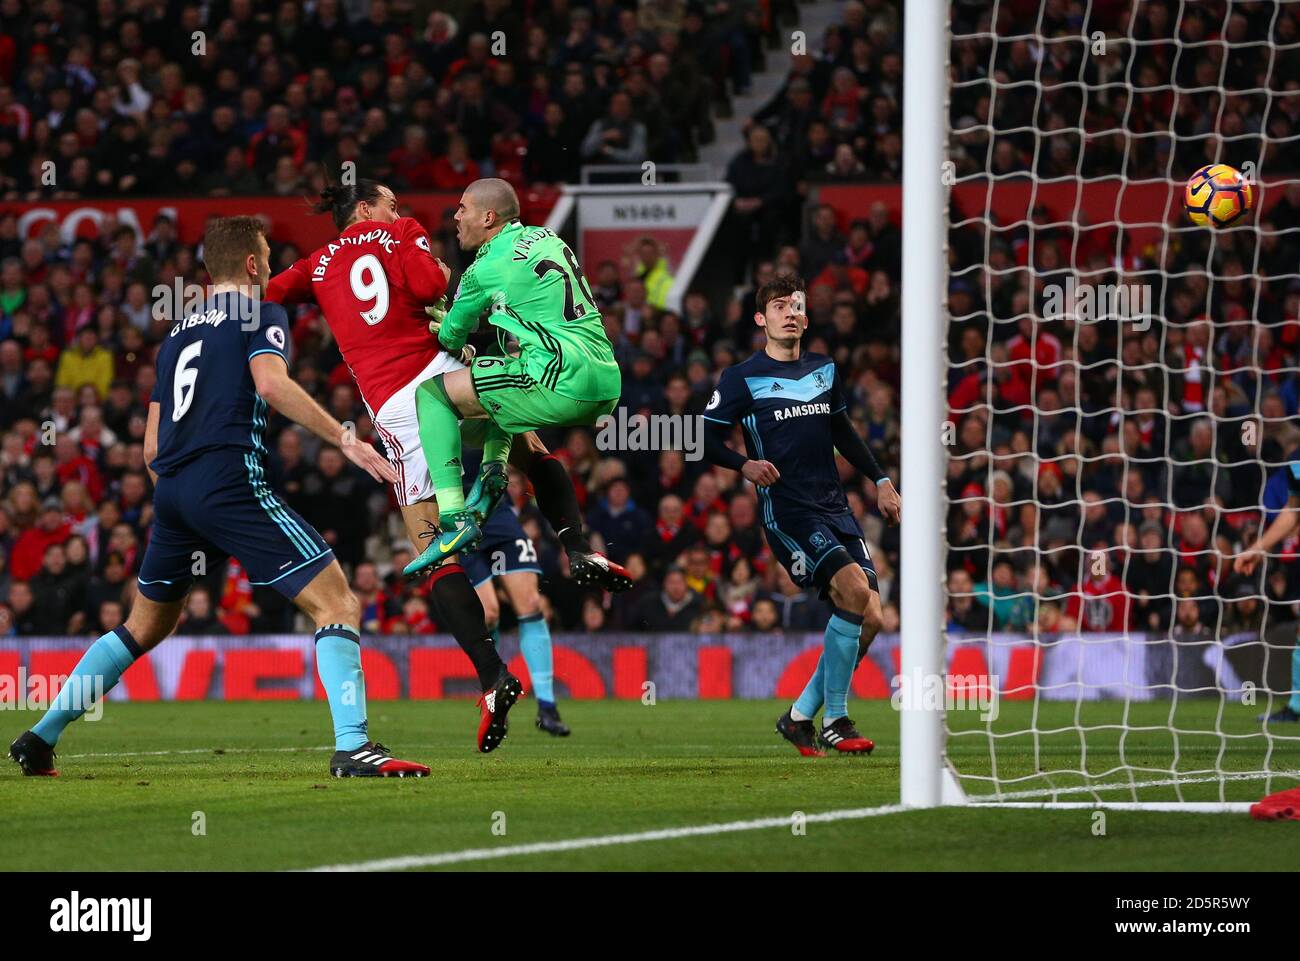 Manchester United's Zlatan Ibrahimovic scores but has the goal ruled out for a foul on Middlesbrough goalkeeper Victor Valdes  Stock Photo